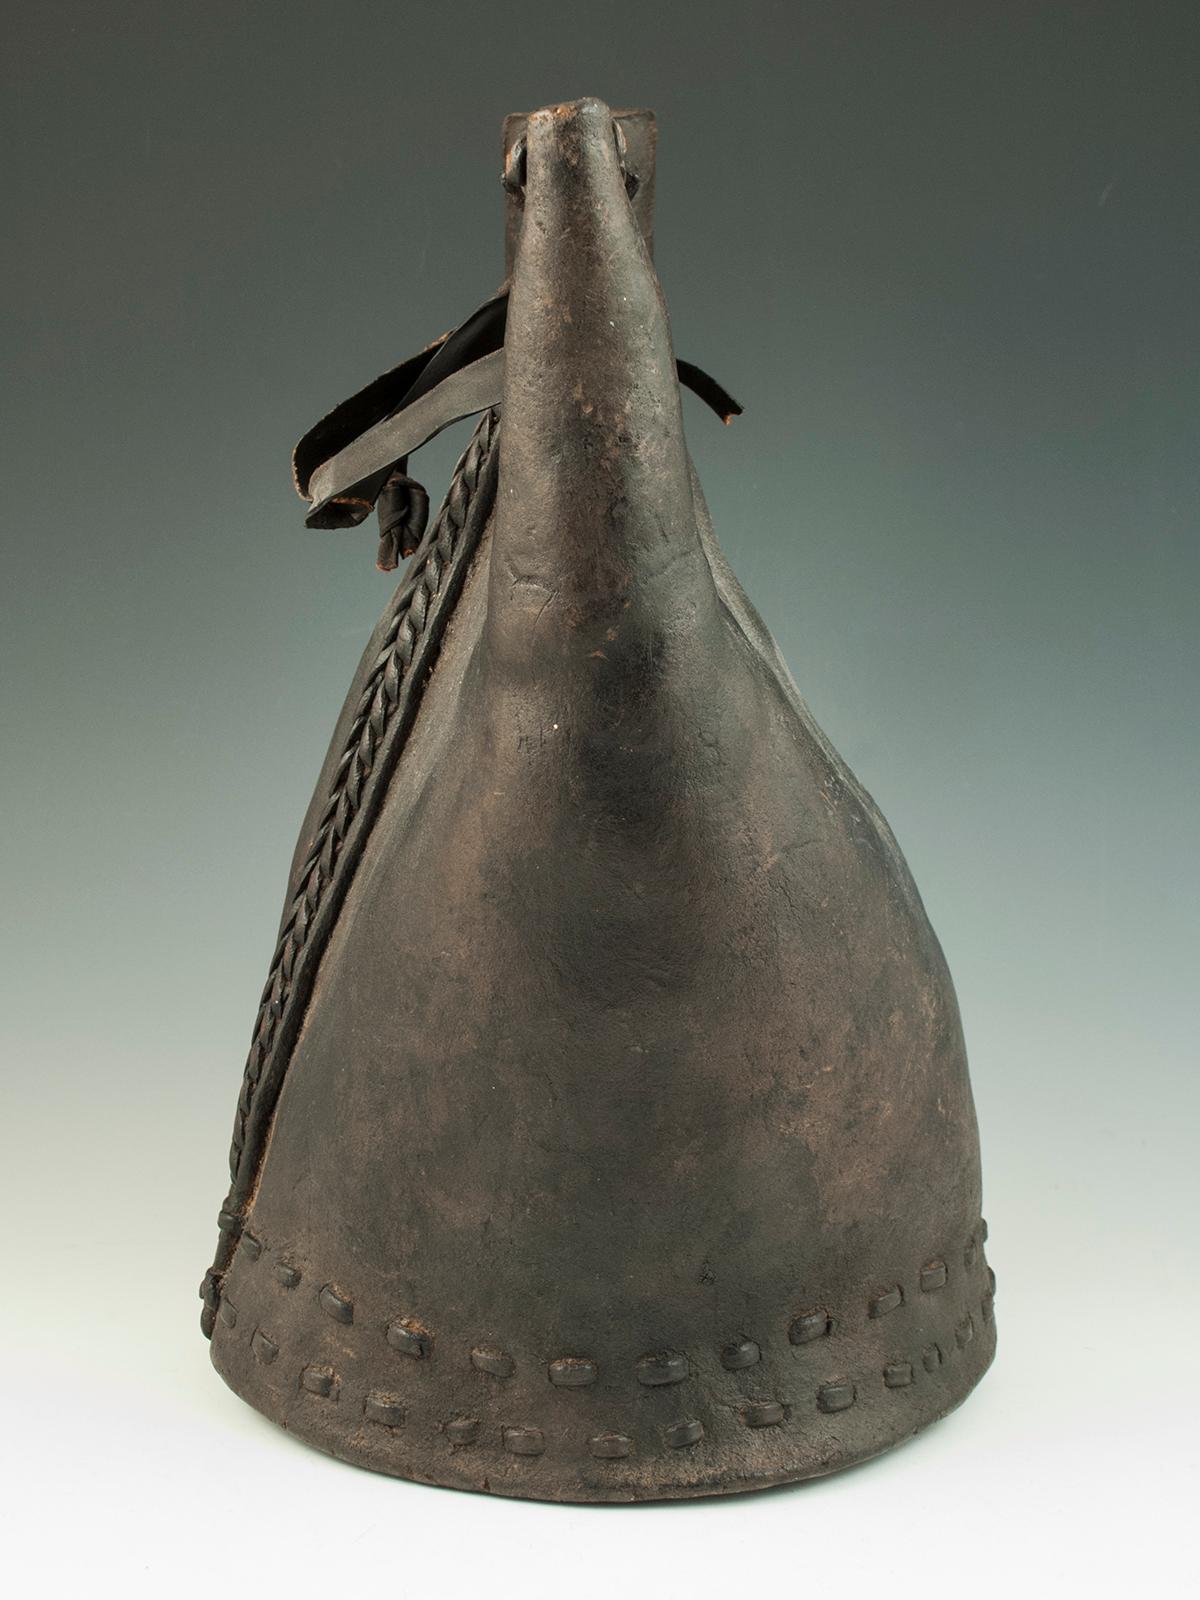 16th century leather tribal ottoman water flask (Matara), Turkey.

The round body of this matara tapers into two spouts: on the left is a small stitched opening for pouring and on the right is a larger opening for filling the flask. There would have